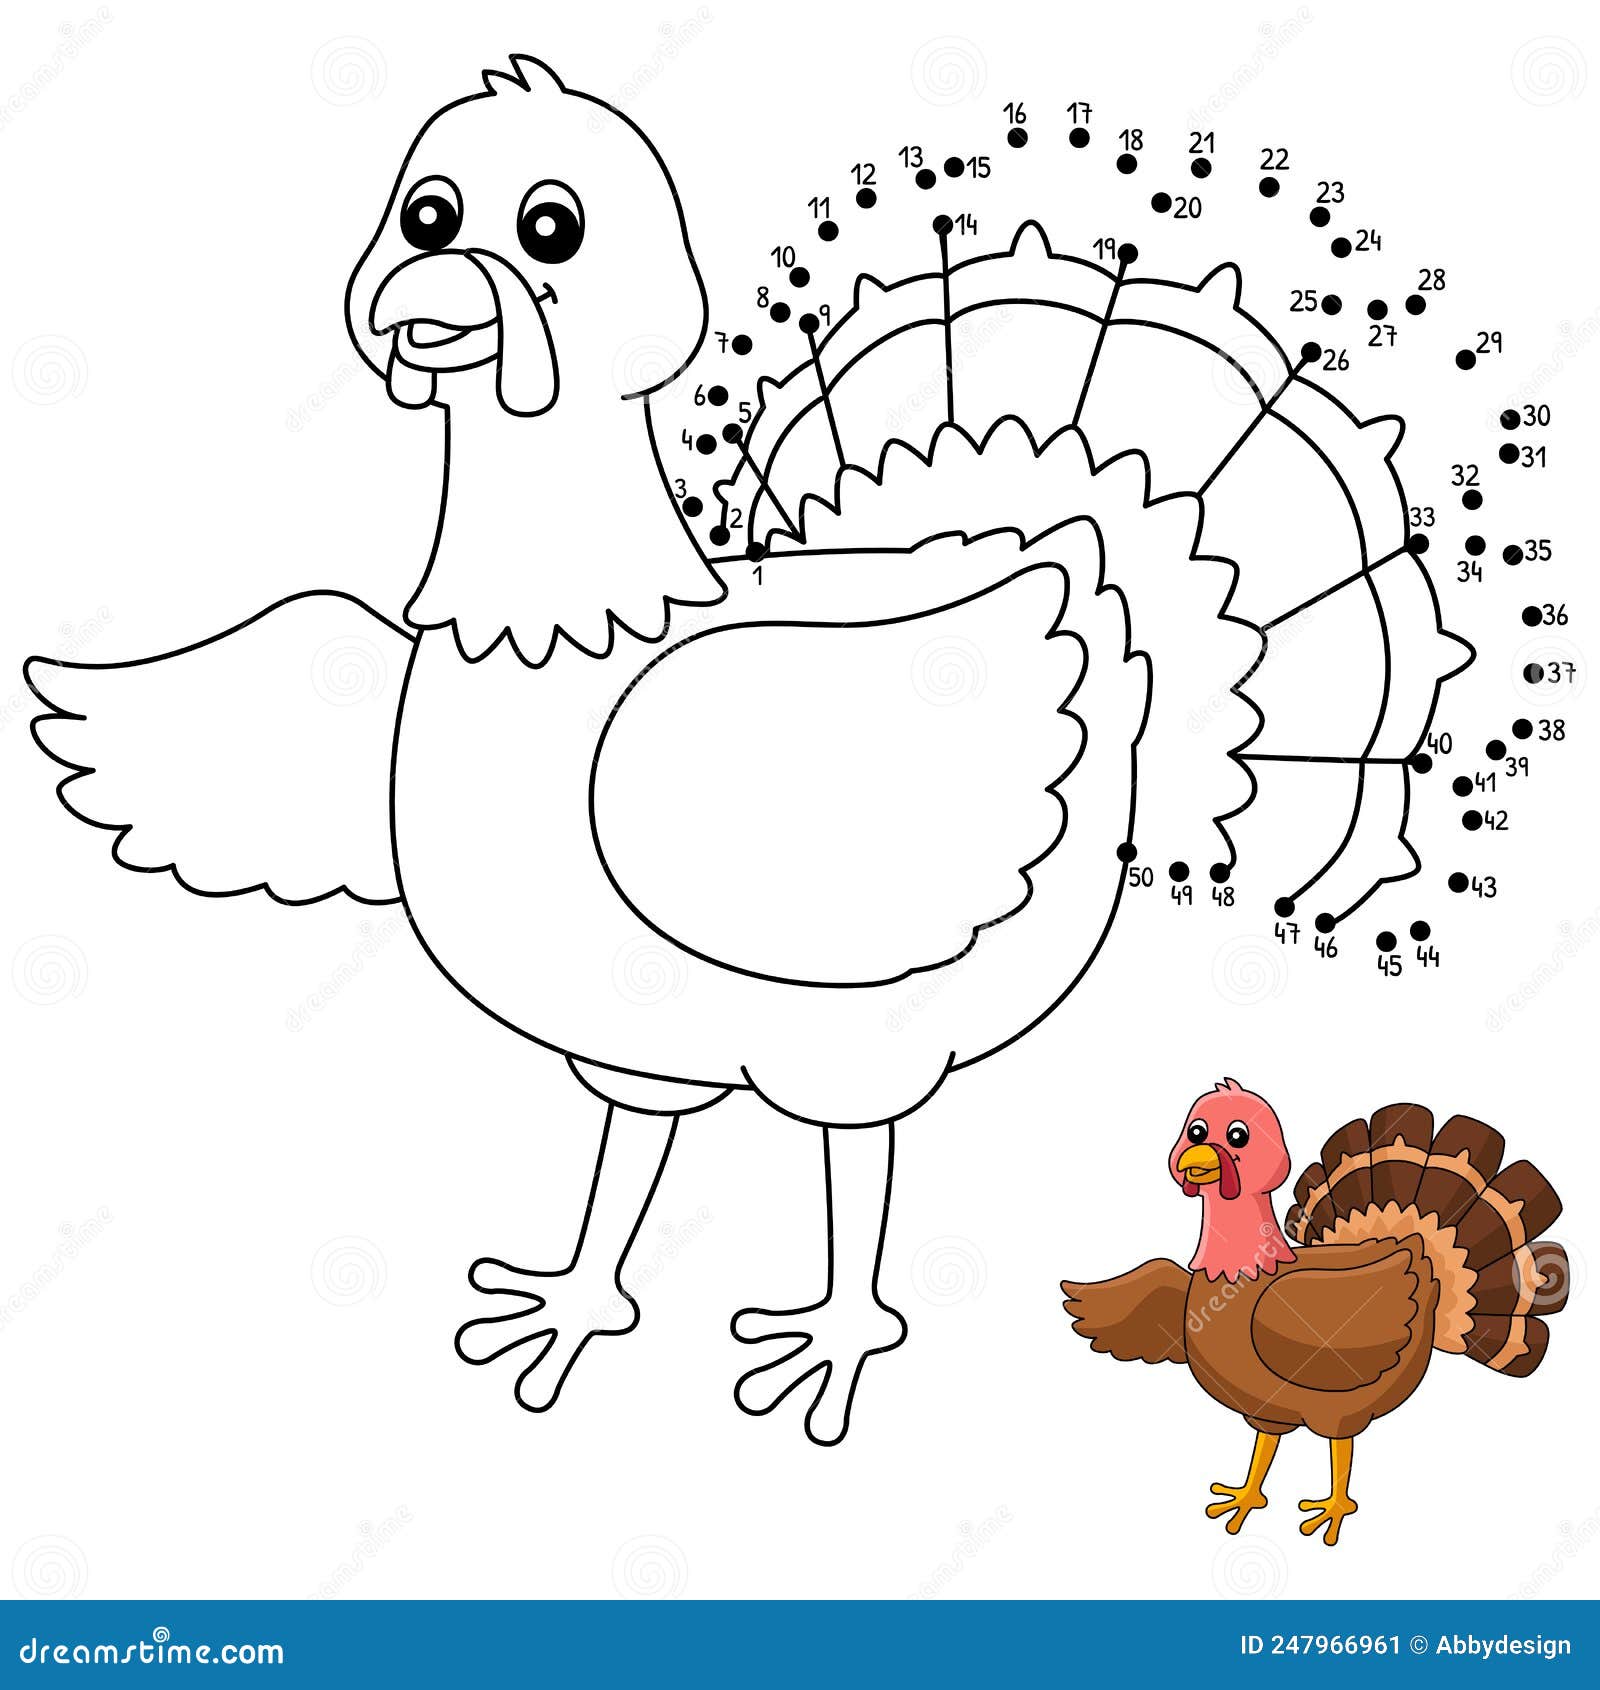 Dot to dot turkey coloring page for kids stock vector